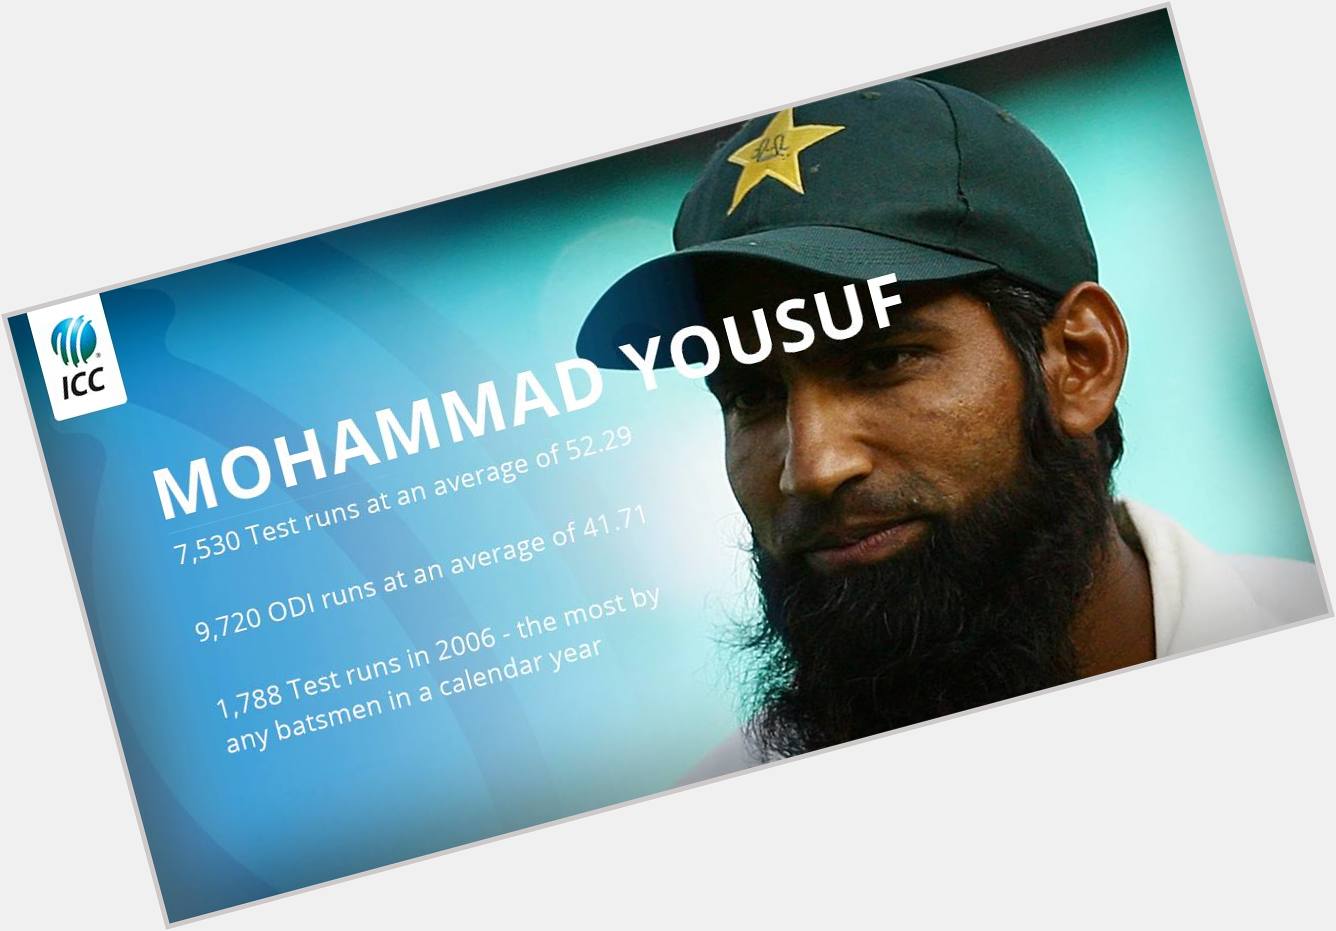 Happy Birthday, Pakistan\s run machine Mohammad Yousuf!

Who will break his most Test runs in a calendar year record? 